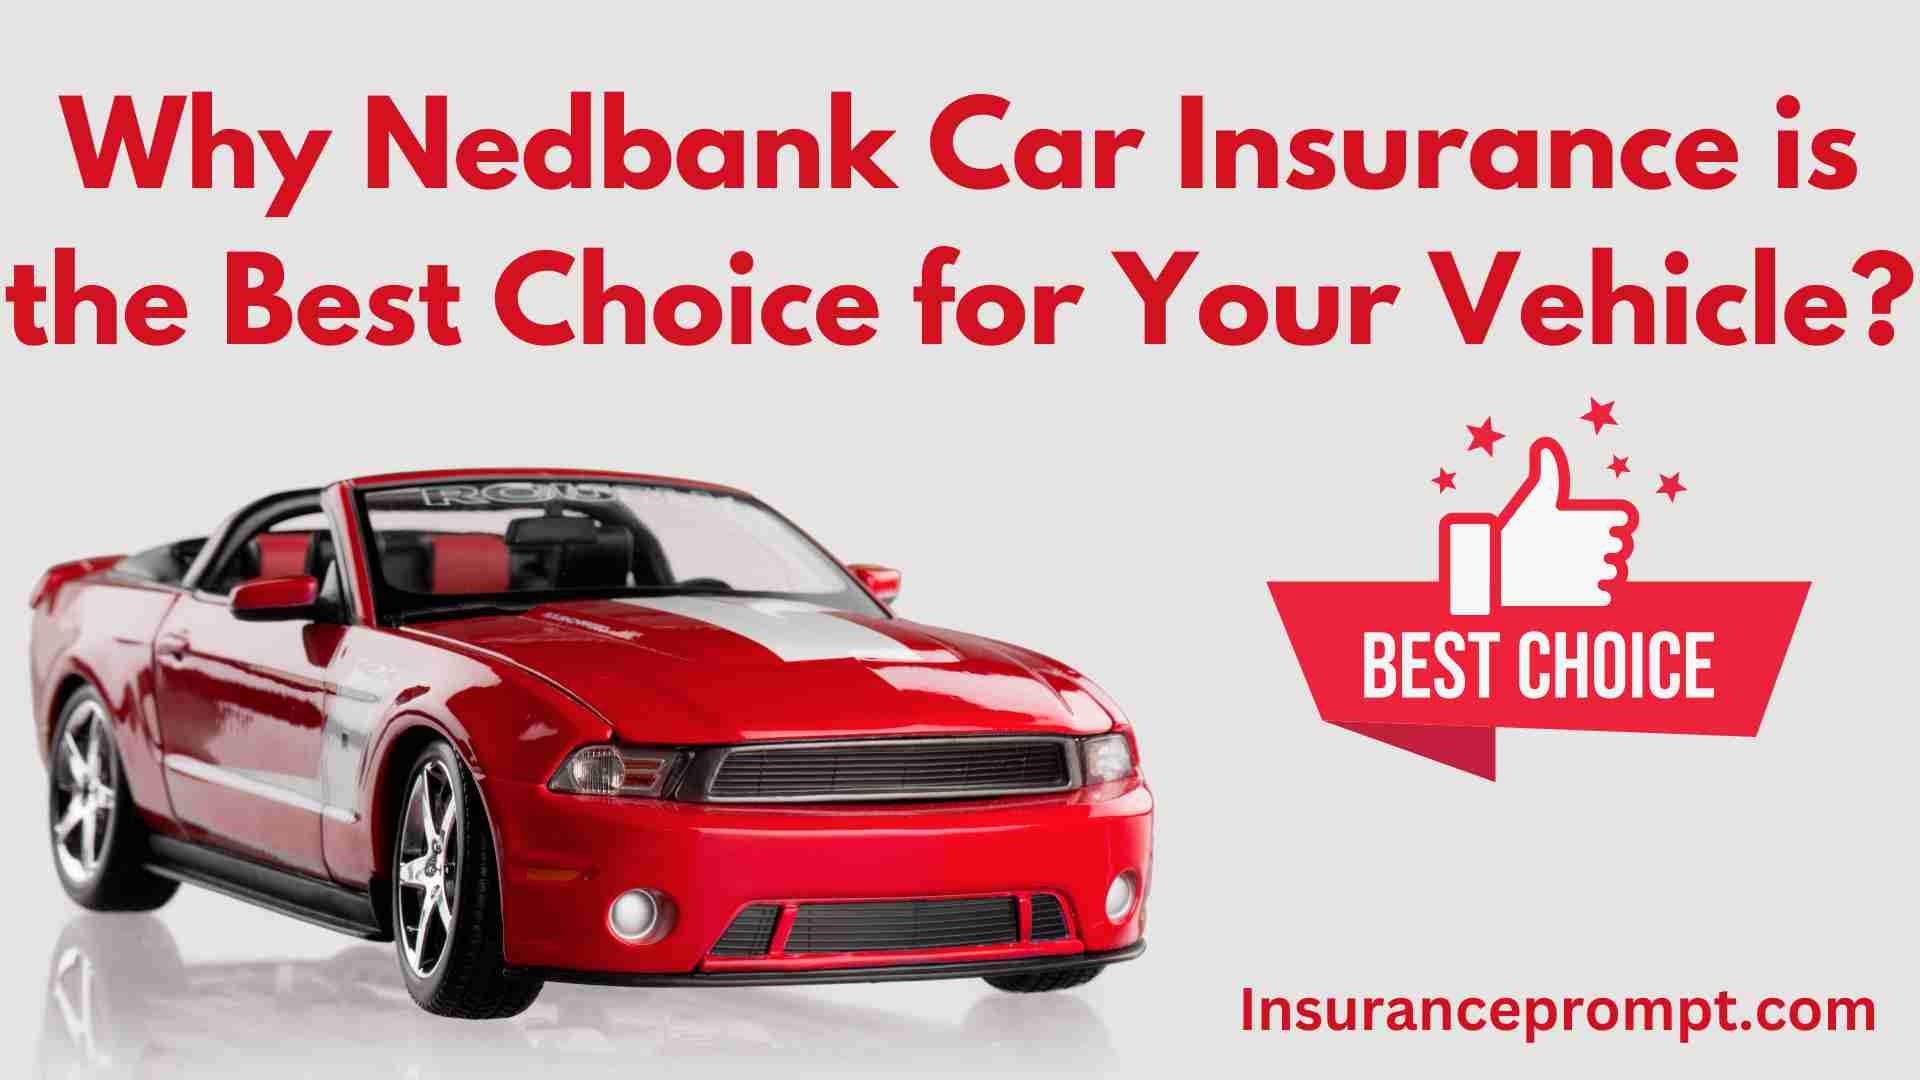 Why Nedbank Car Insurance is the Best Choice for Your Vehicle?